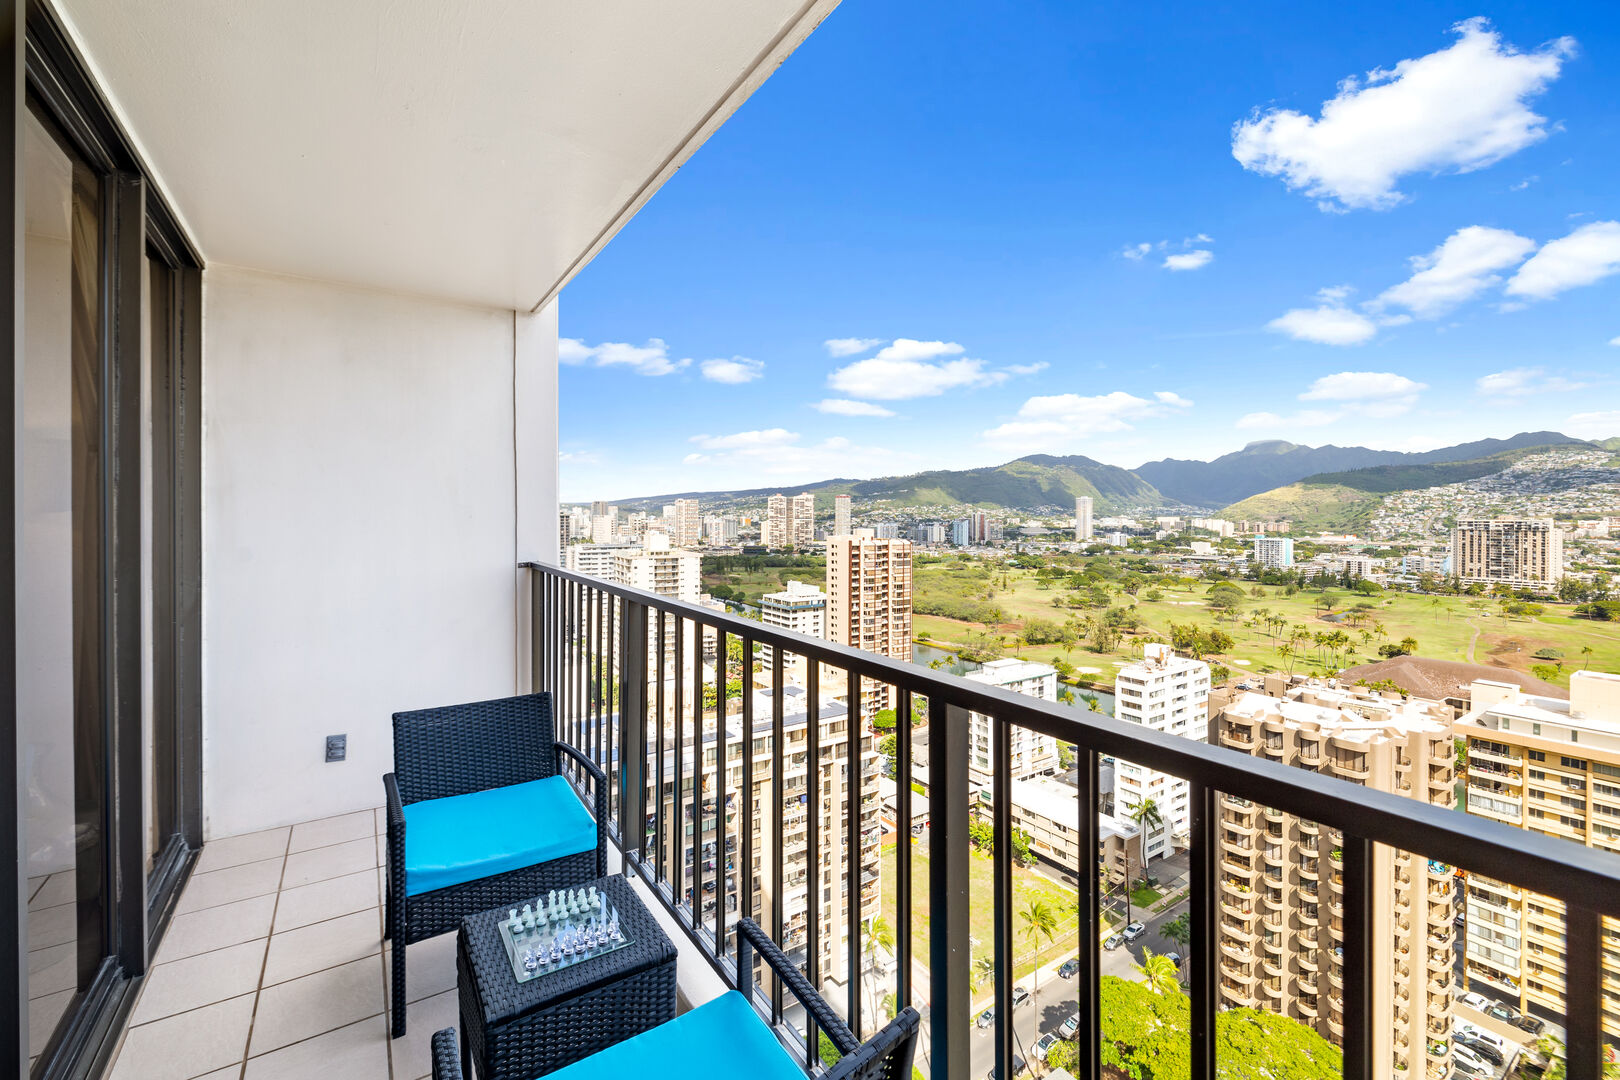 Enjoy the panoramic views of the mountain on your balcony!